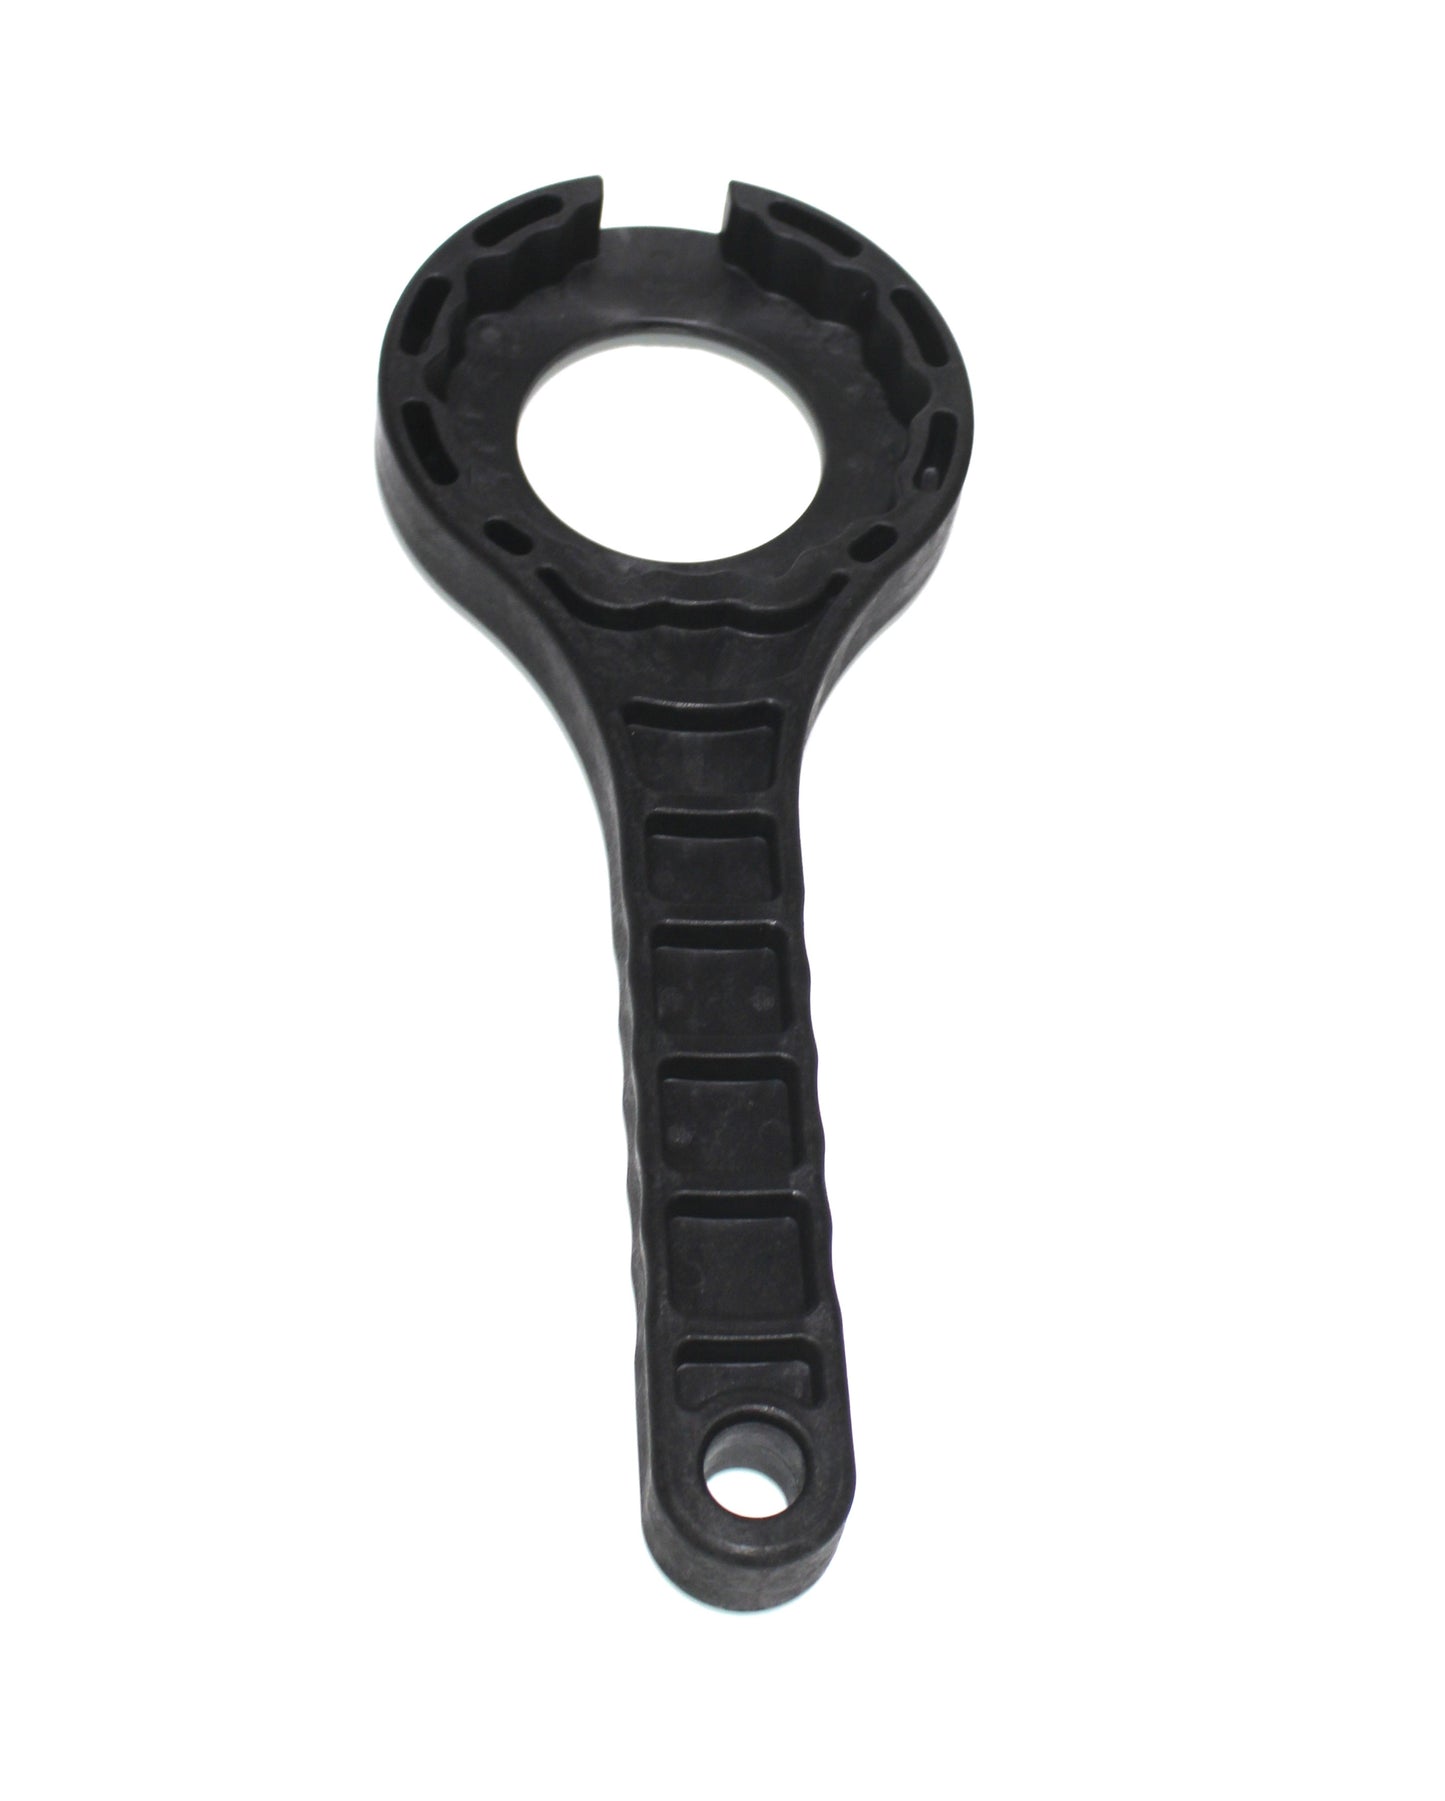 MFC Cap Wrench for Scepter MFC 10L & 20L Military Fuel Gas Caps Gas can Wrench